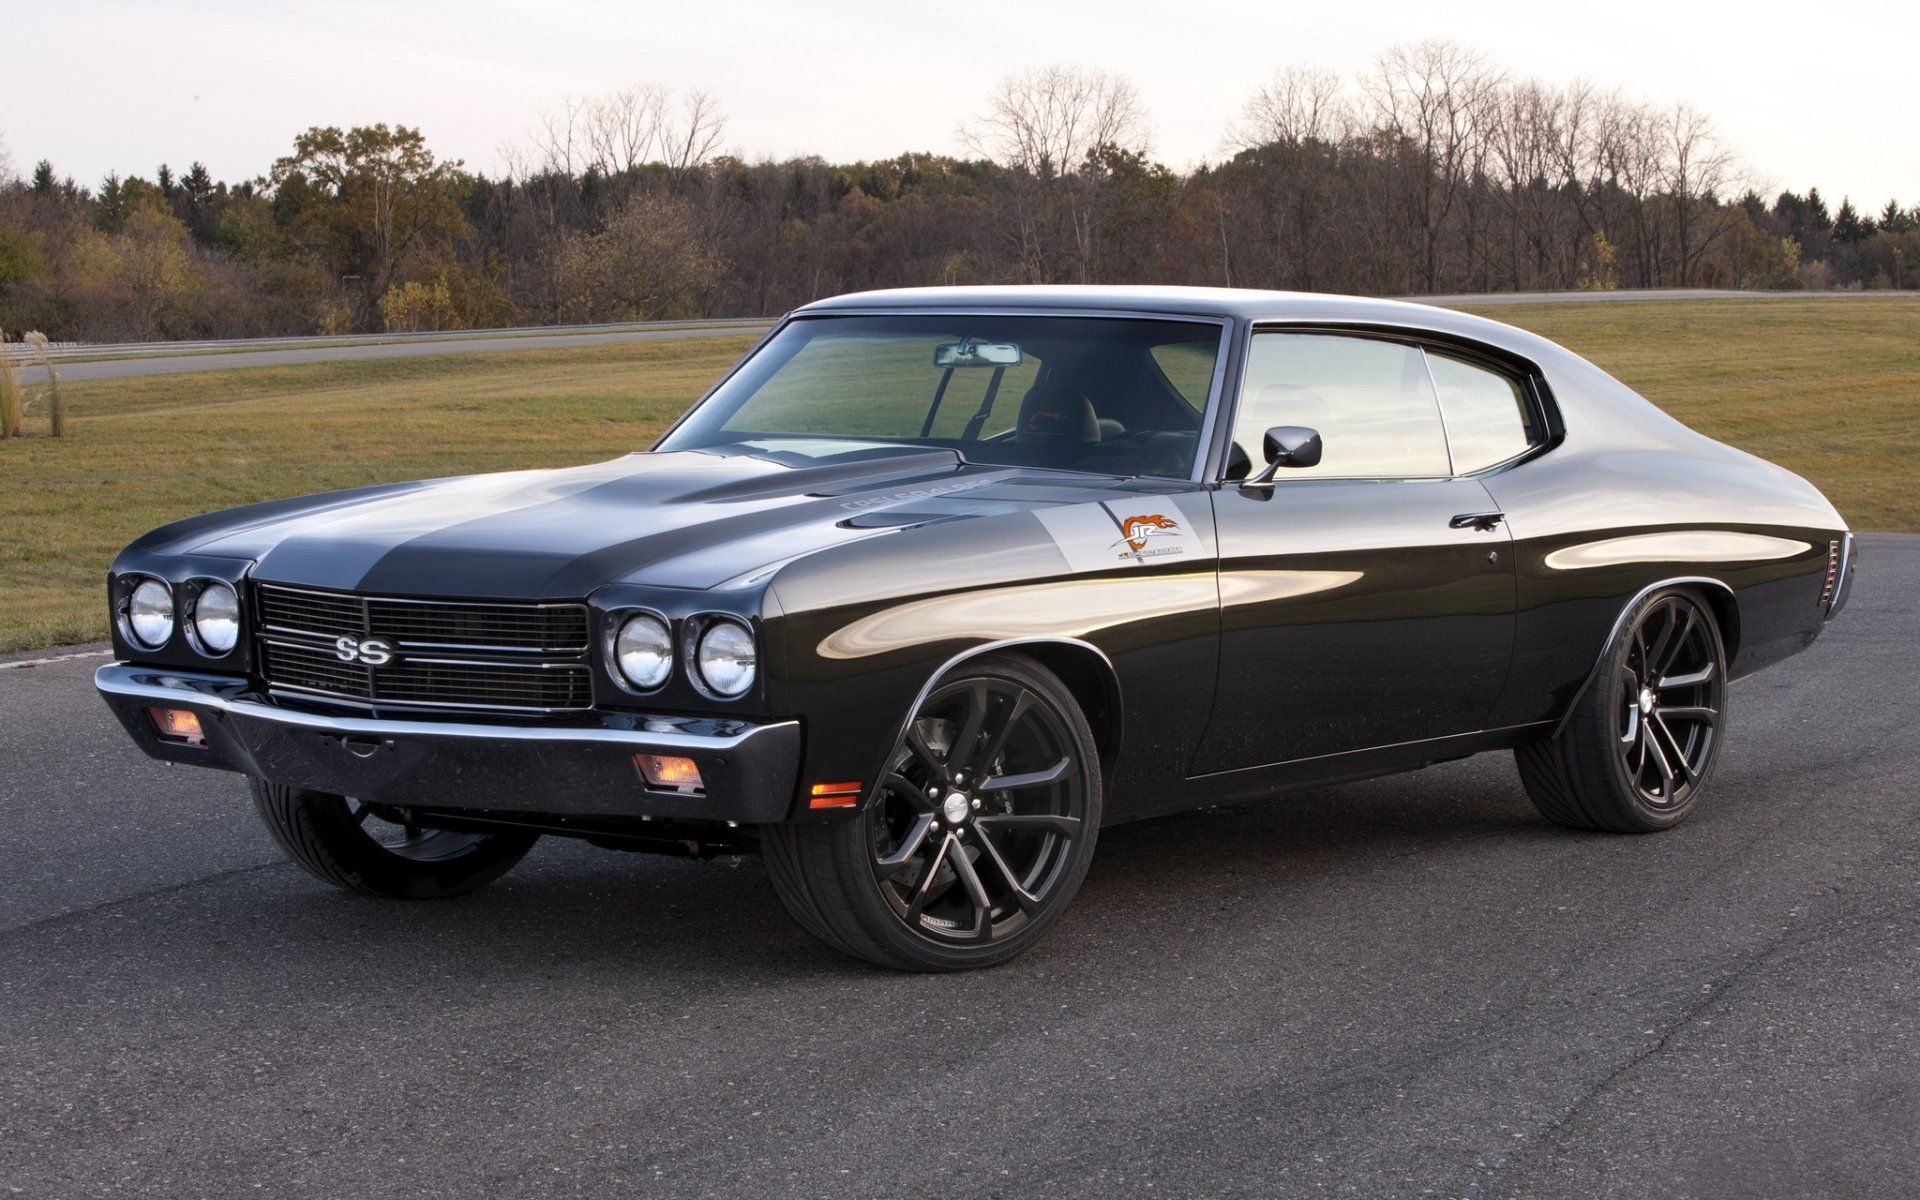 1970 Chevy Chevelle SS -   Chevy Chevelle SS